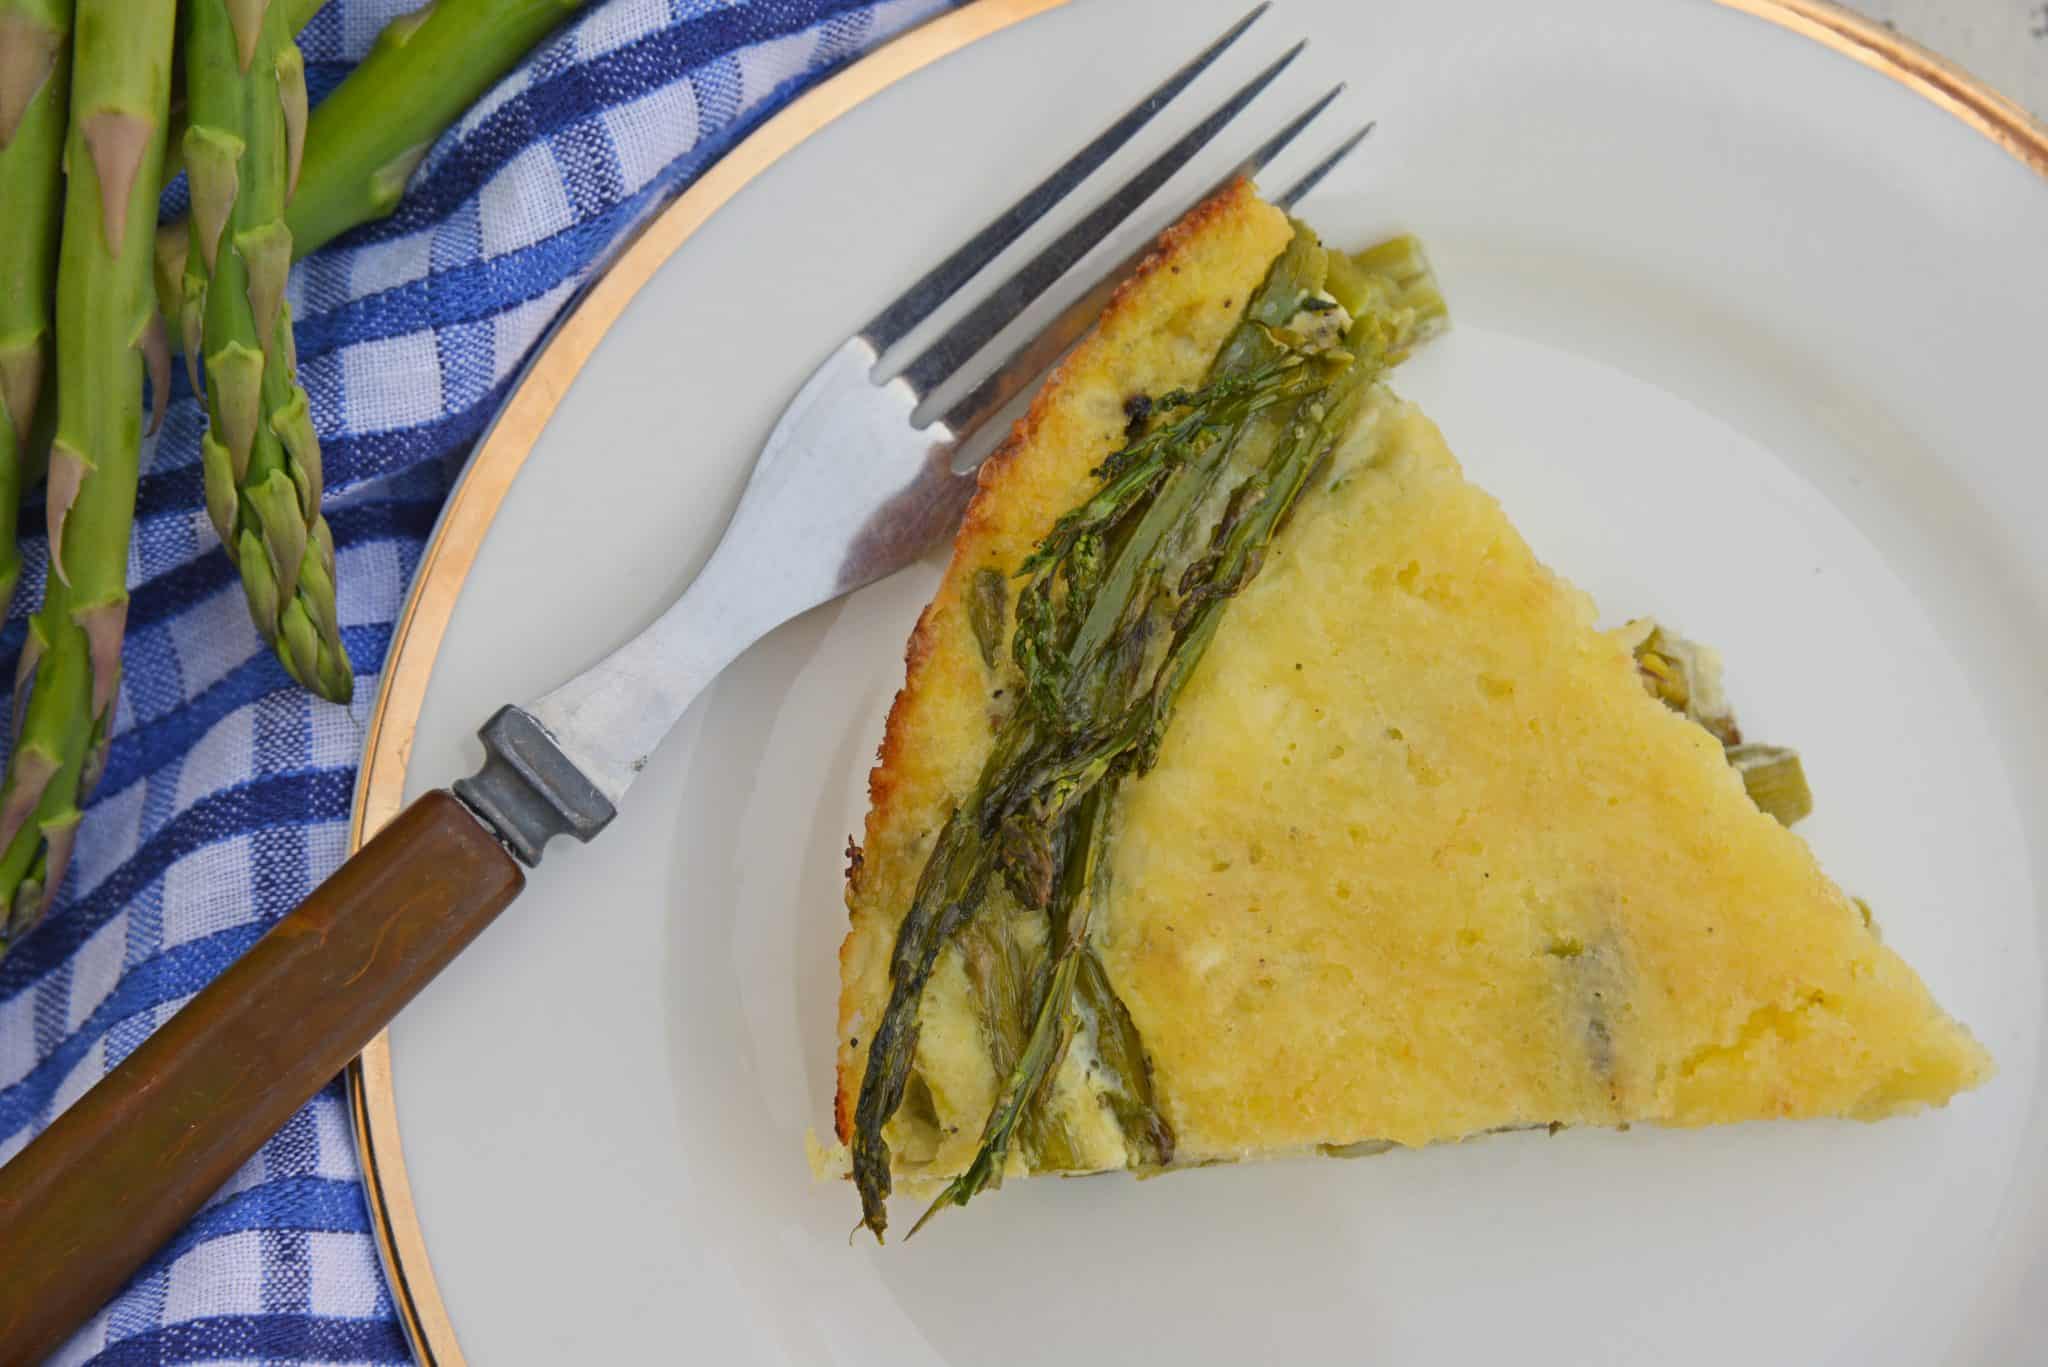 This crustless quiche recipe is one of the best asparagus recipes. An asparagus quiche would be a great addition to your next breakfast, brunch or lunch! #asparagusquicherecipe #crustlessquicherecipe #asparagusrecipes www.savoryexperiments.com